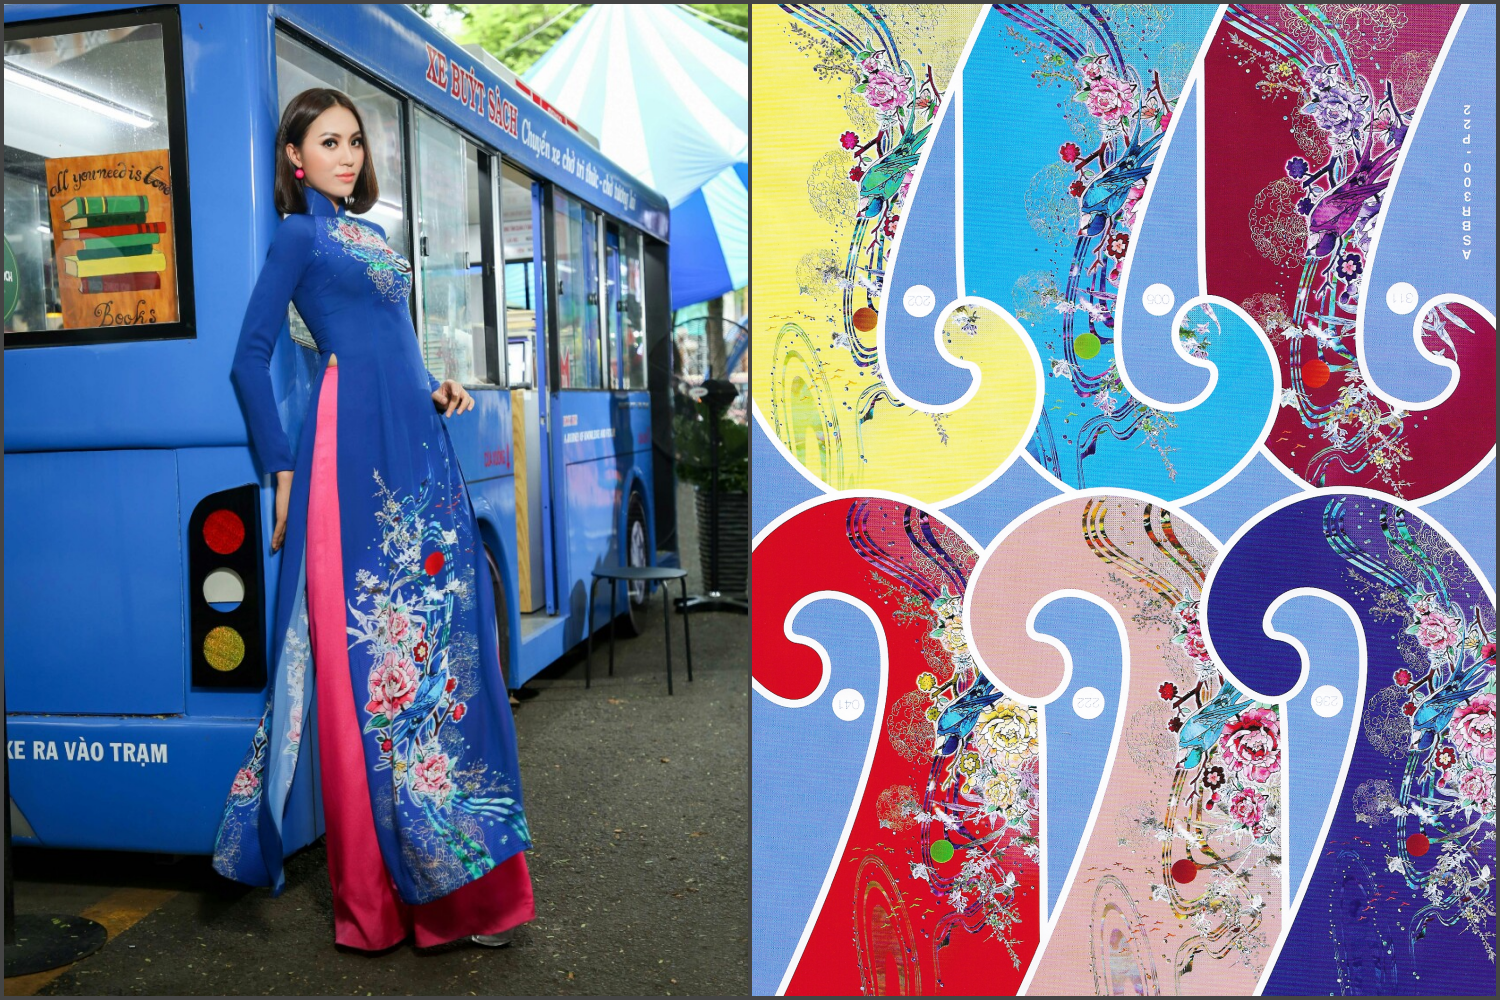 Made-to-measure ao dai by Mark&Vy using high quality, Thai Tuan fabric. Wide range of color options.